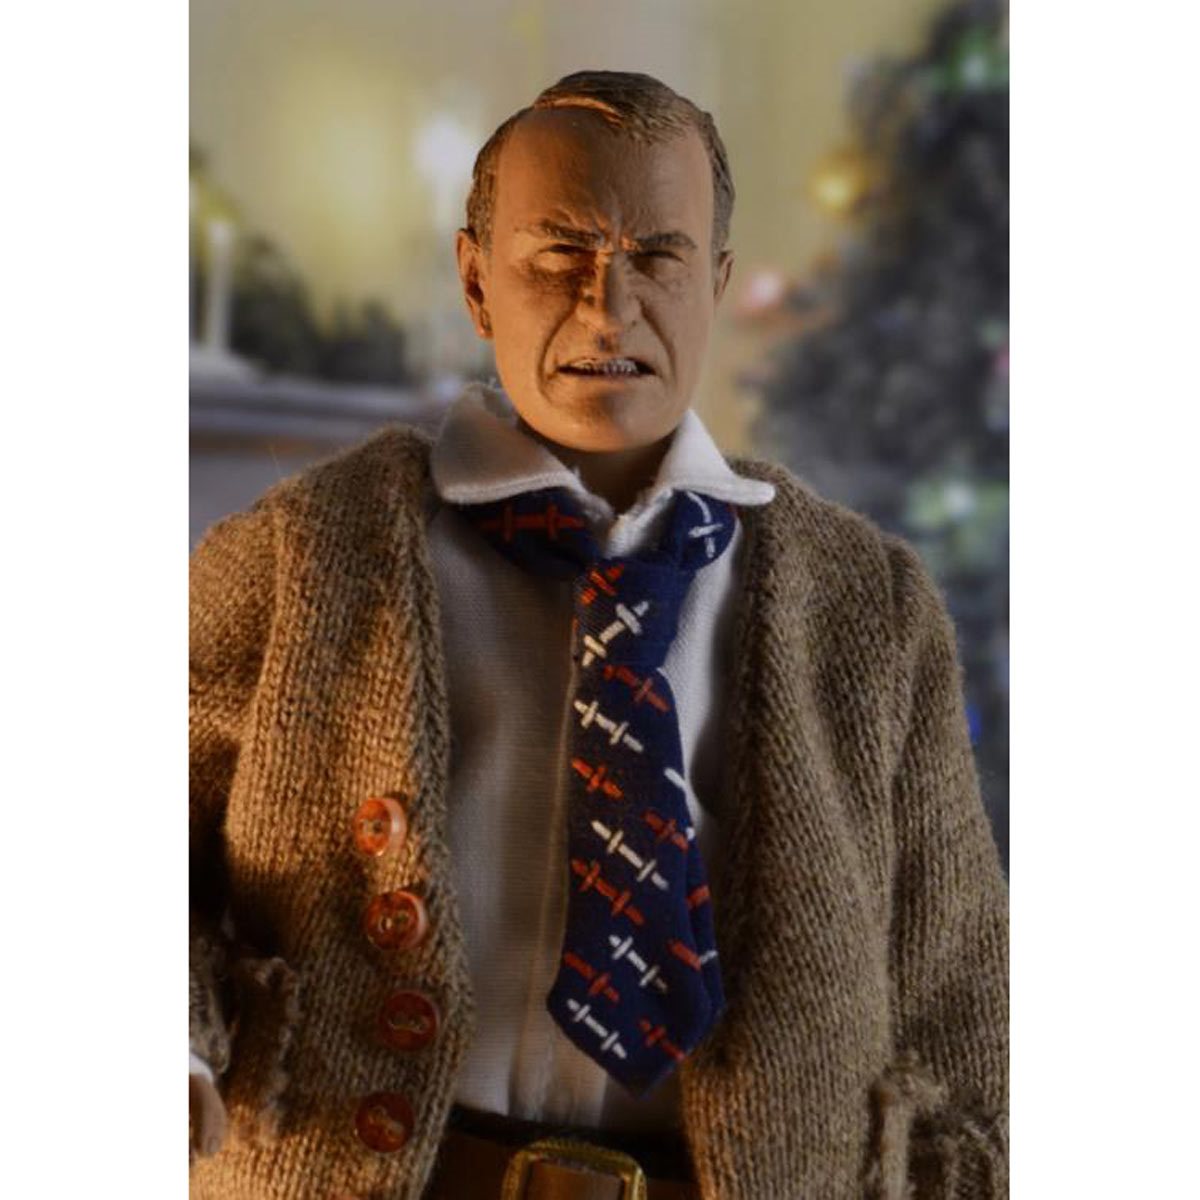 NECA - A Christmas Story - Old Man 8" Clothed Action Figure - Zlc Collectibles